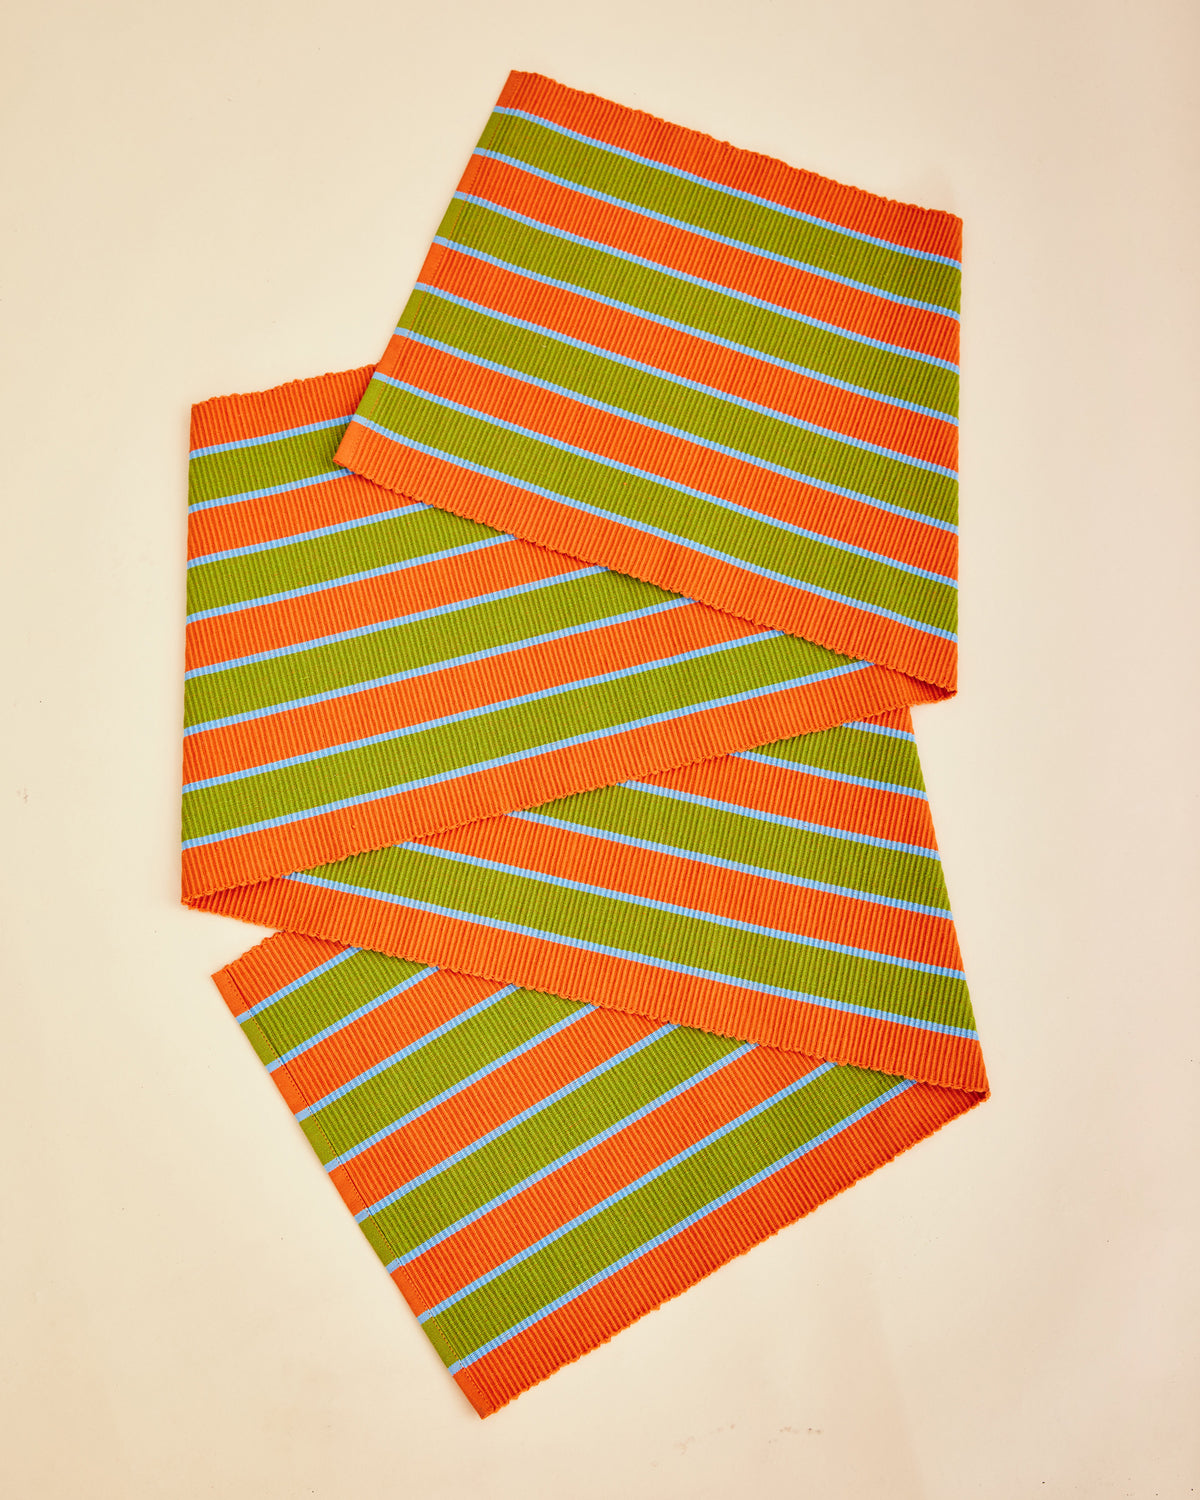 Dusen Dusen Saffron Stripe Runner. Runner in orange, green, and blue Saffron Stripe. Cotton runner in tri-color stripes with a ribbed texture. 100% cotton, 12" x 72". Machine wash cold and lay flat to dry. Spot clean as needed. Made in India.